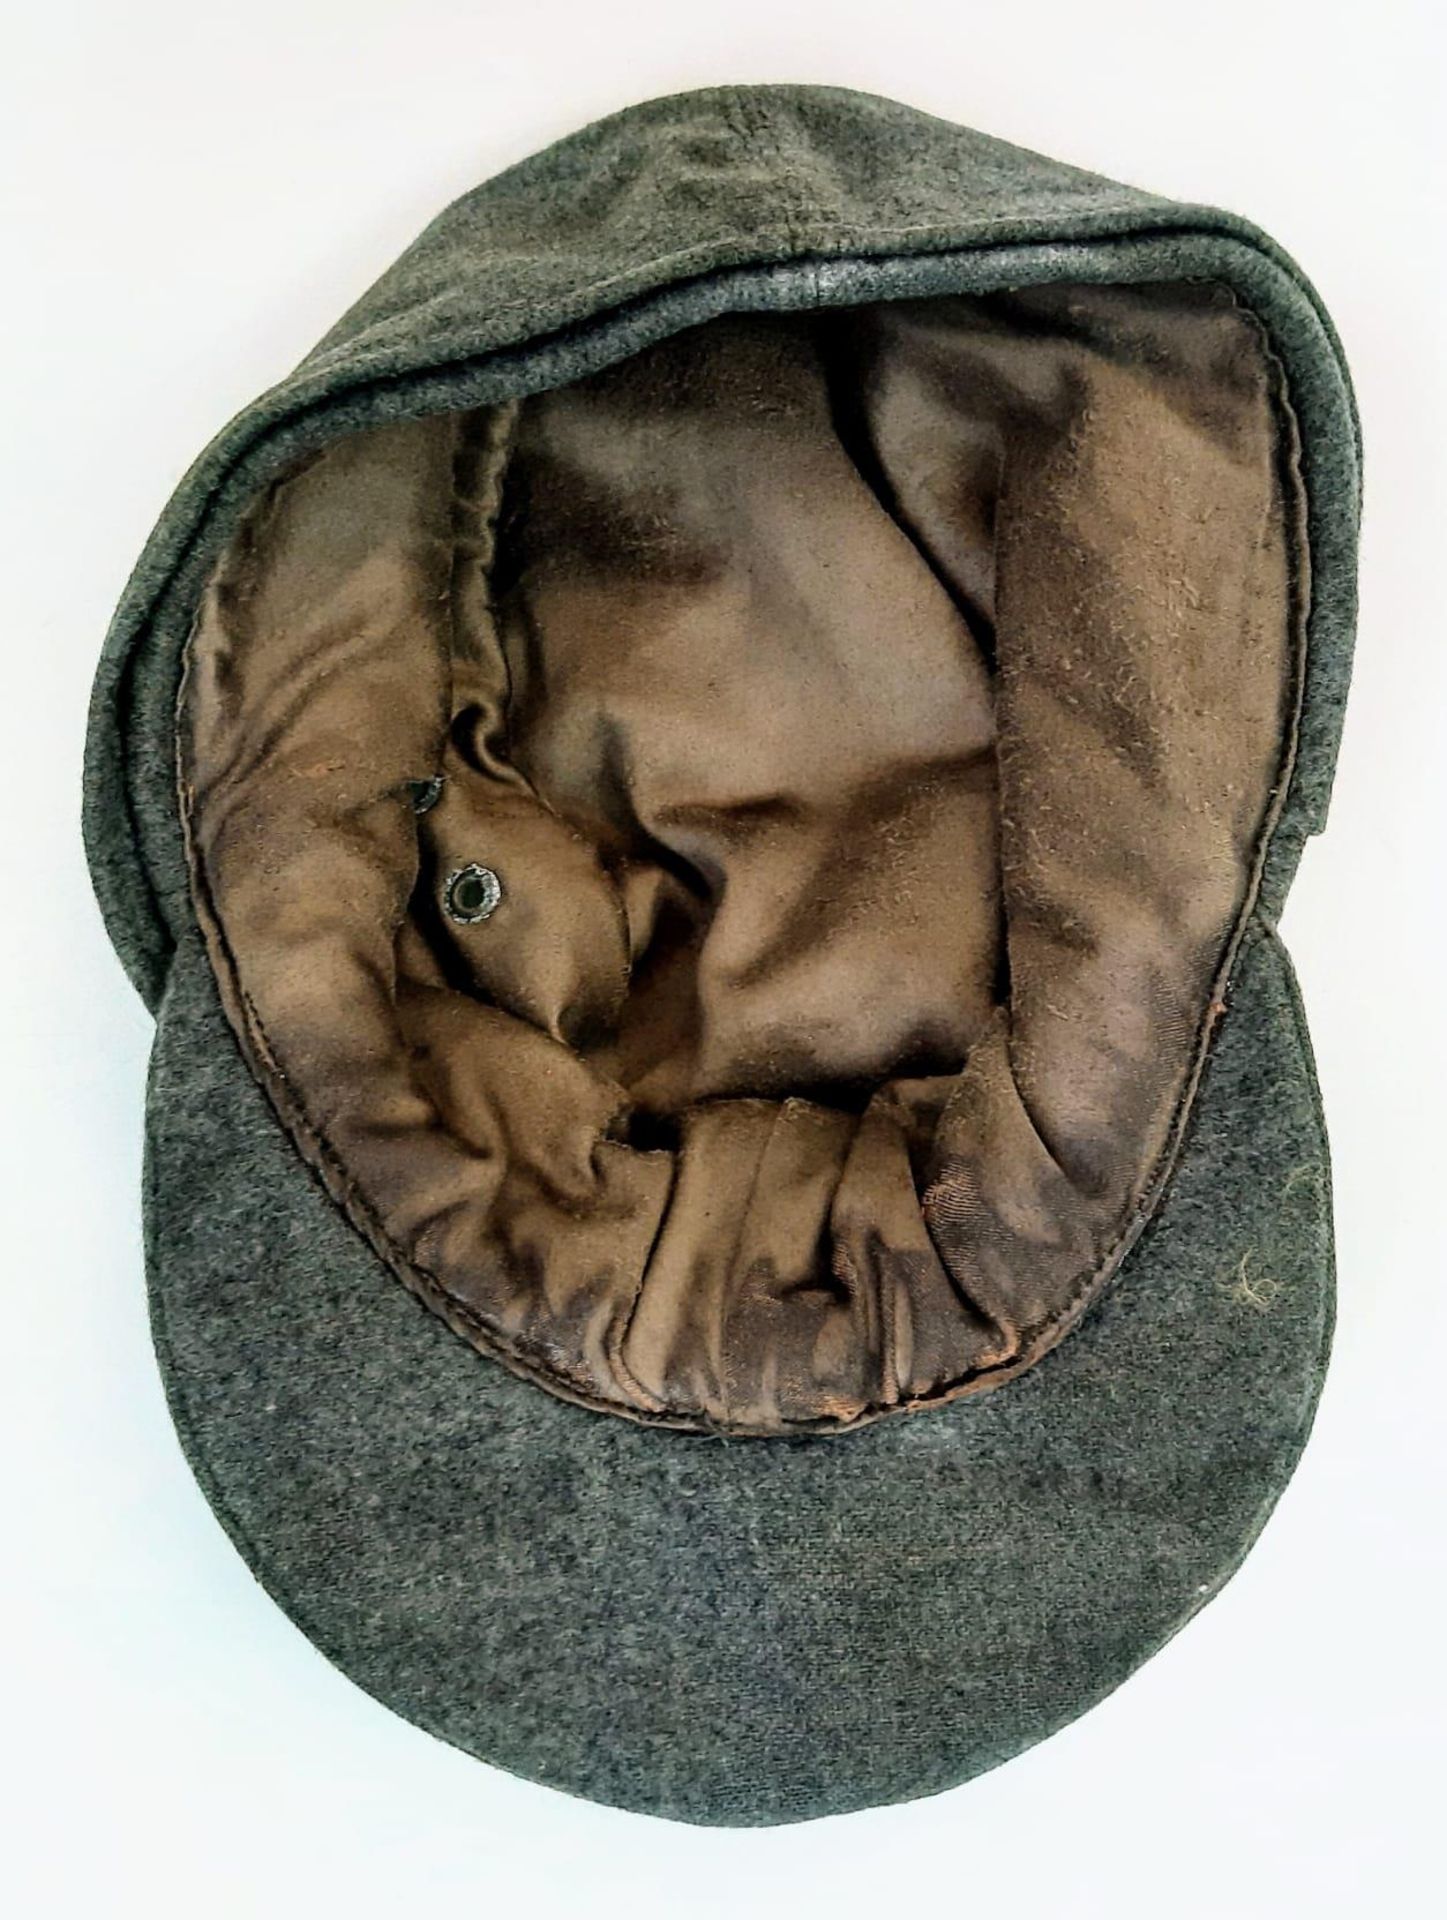 3 rd Reich Waffen SS M34 Ersatz (enonomey) “Blanket” Cap. Thus named because they were made from old - Bild 5 aus 5